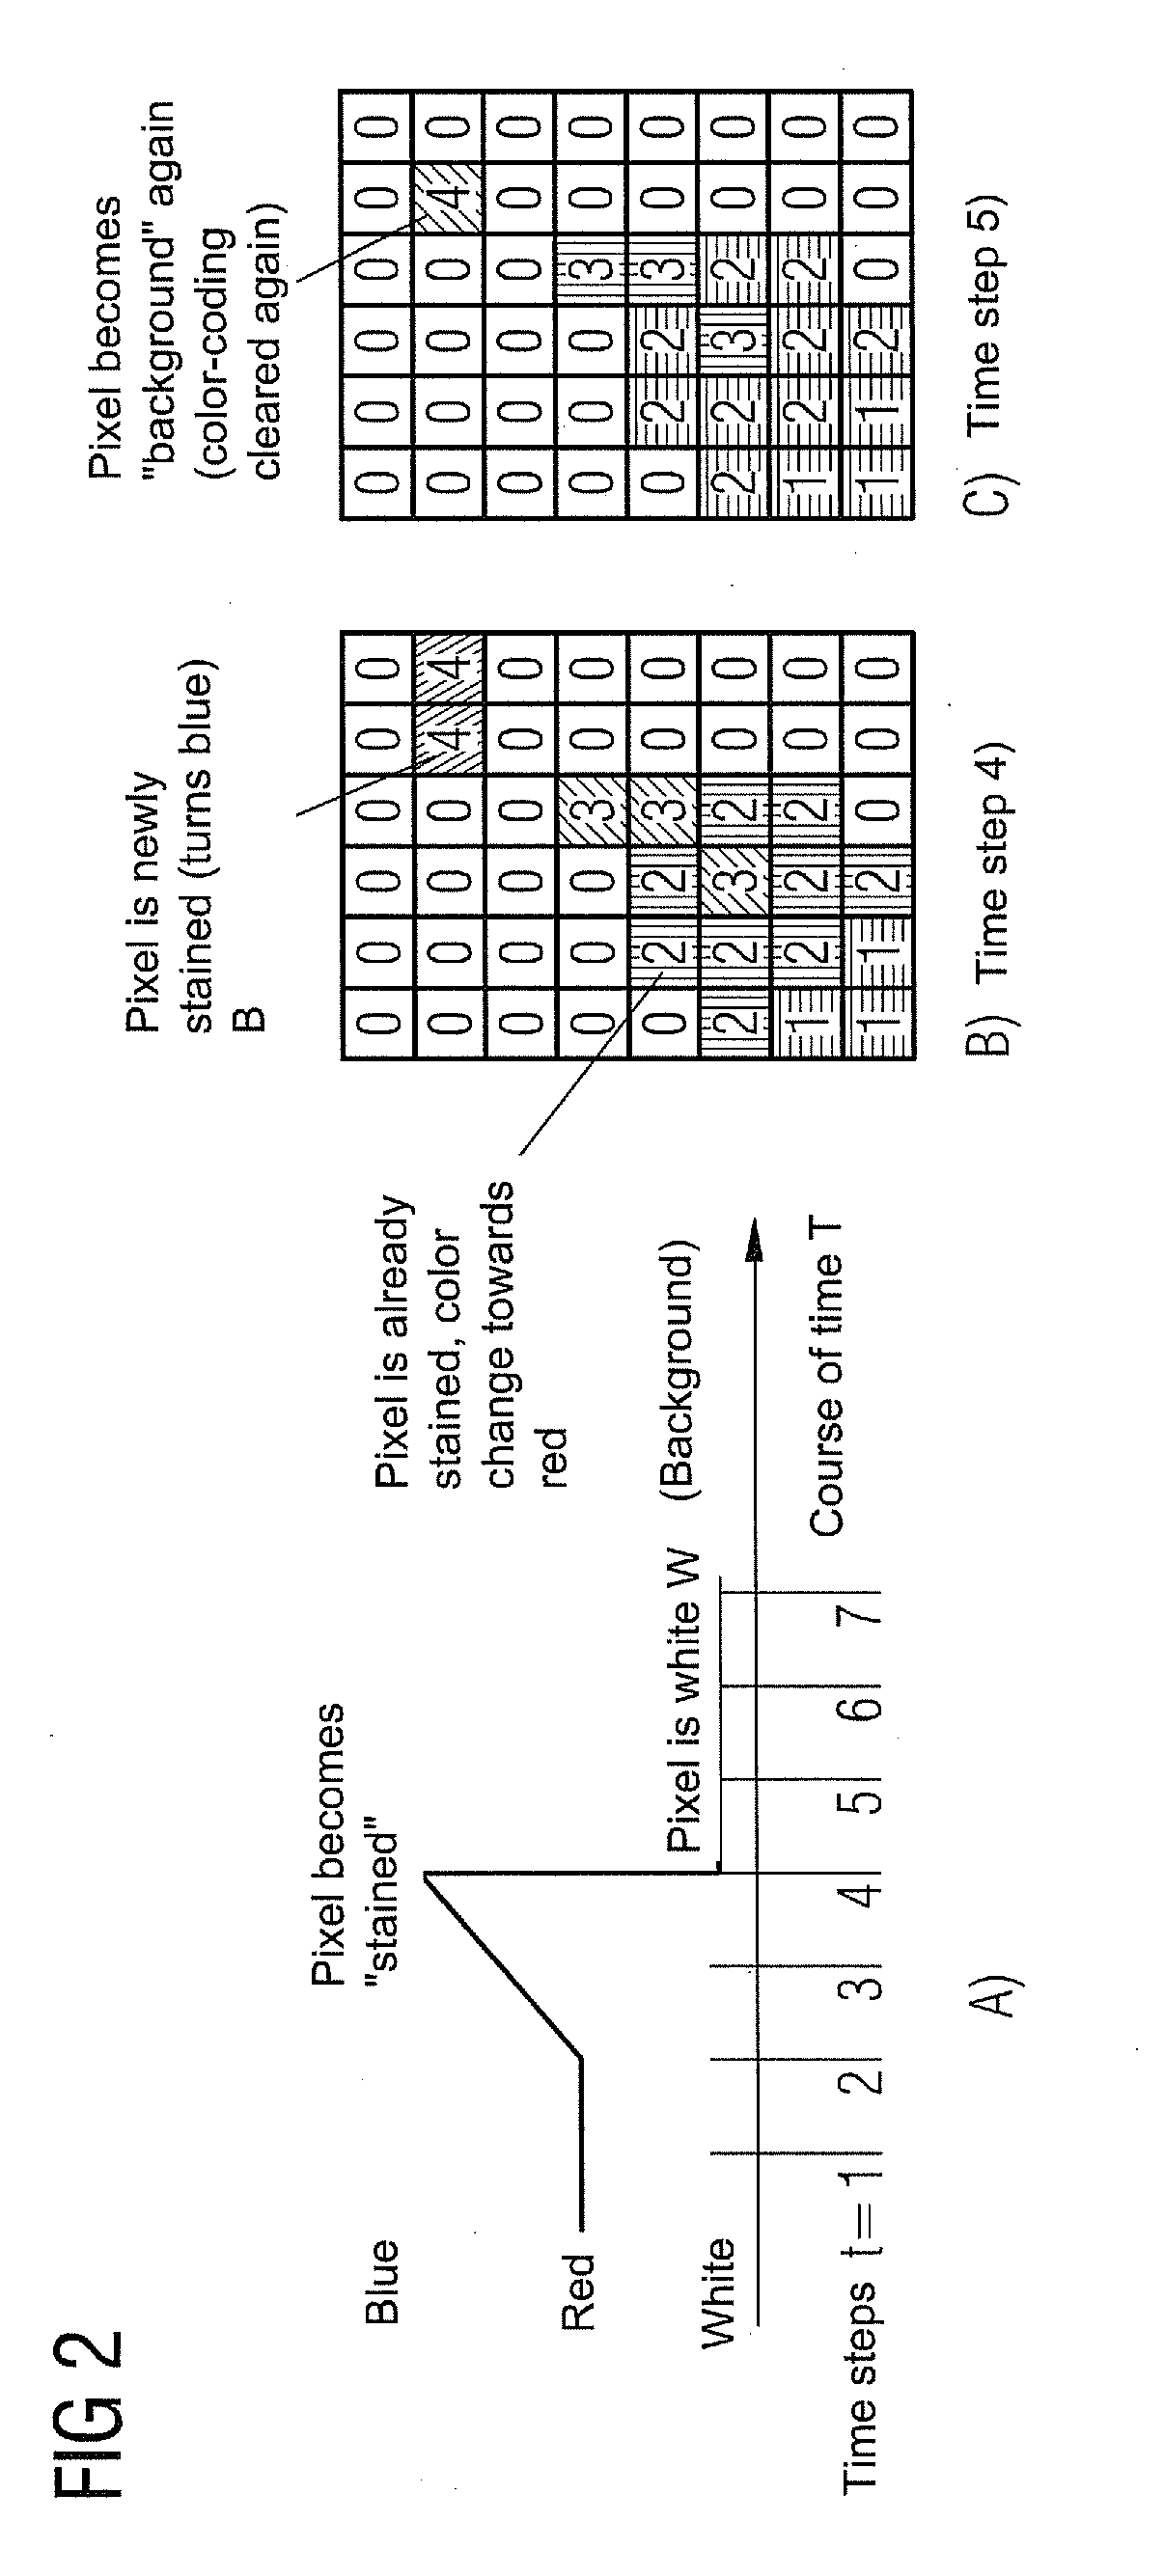 Method for computing a color-coded analysis image